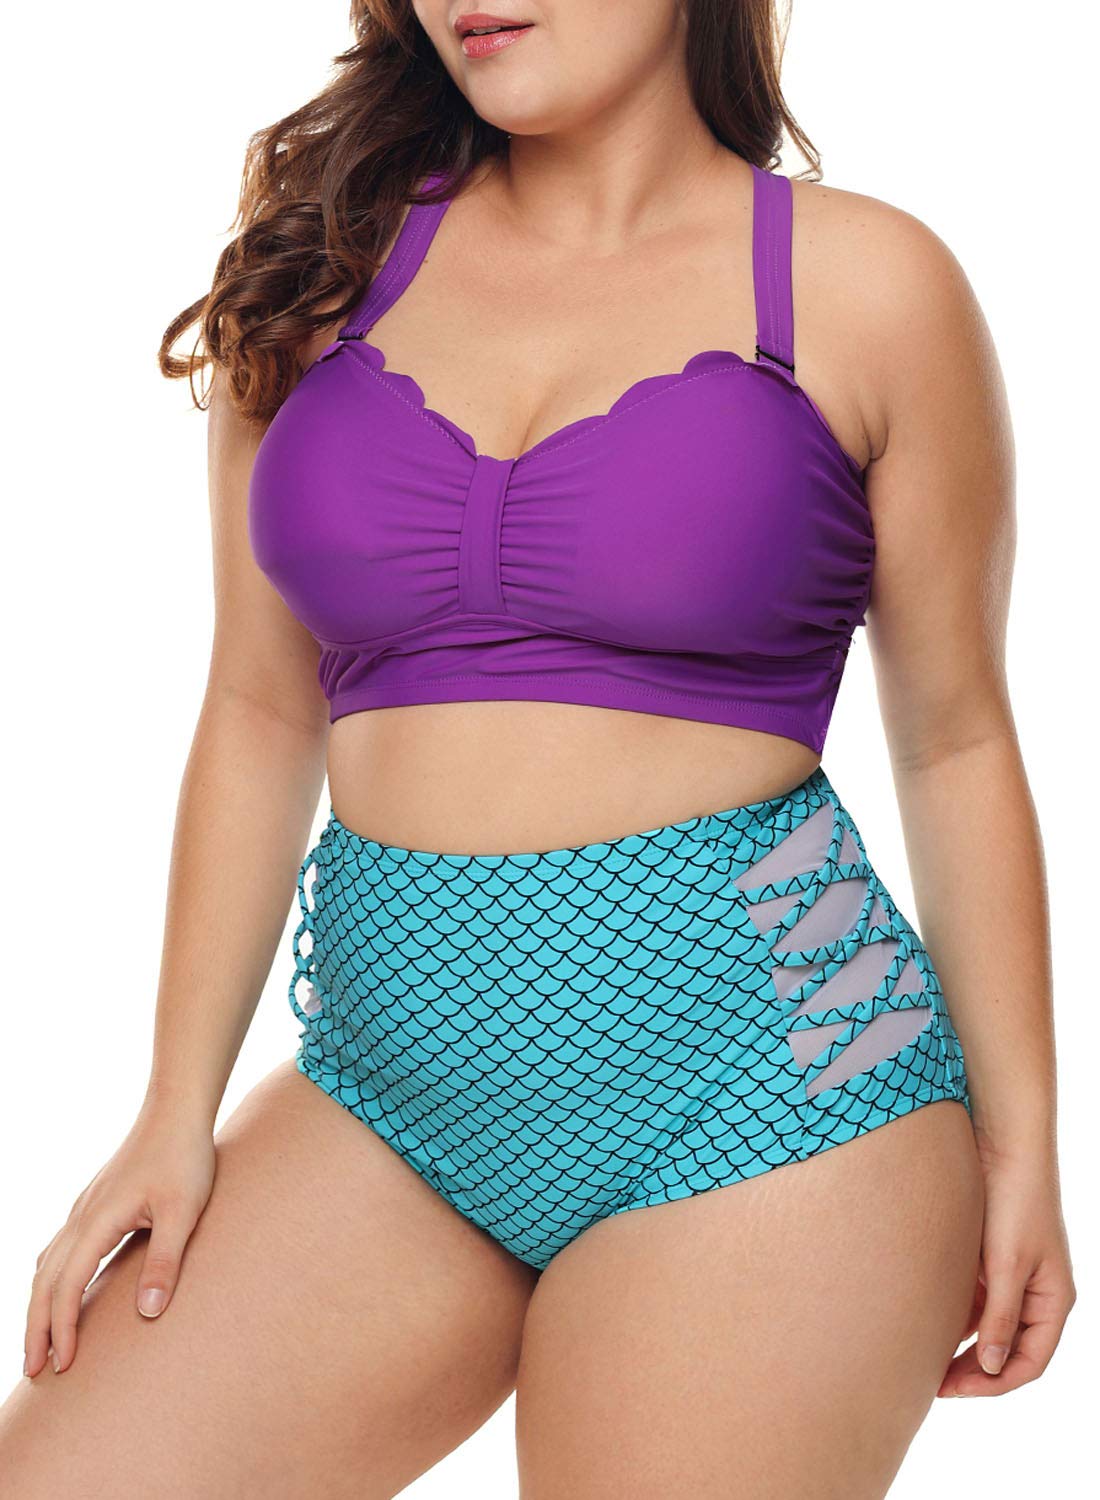 Amazon’s Most Loved Plus-Size Swimsuits